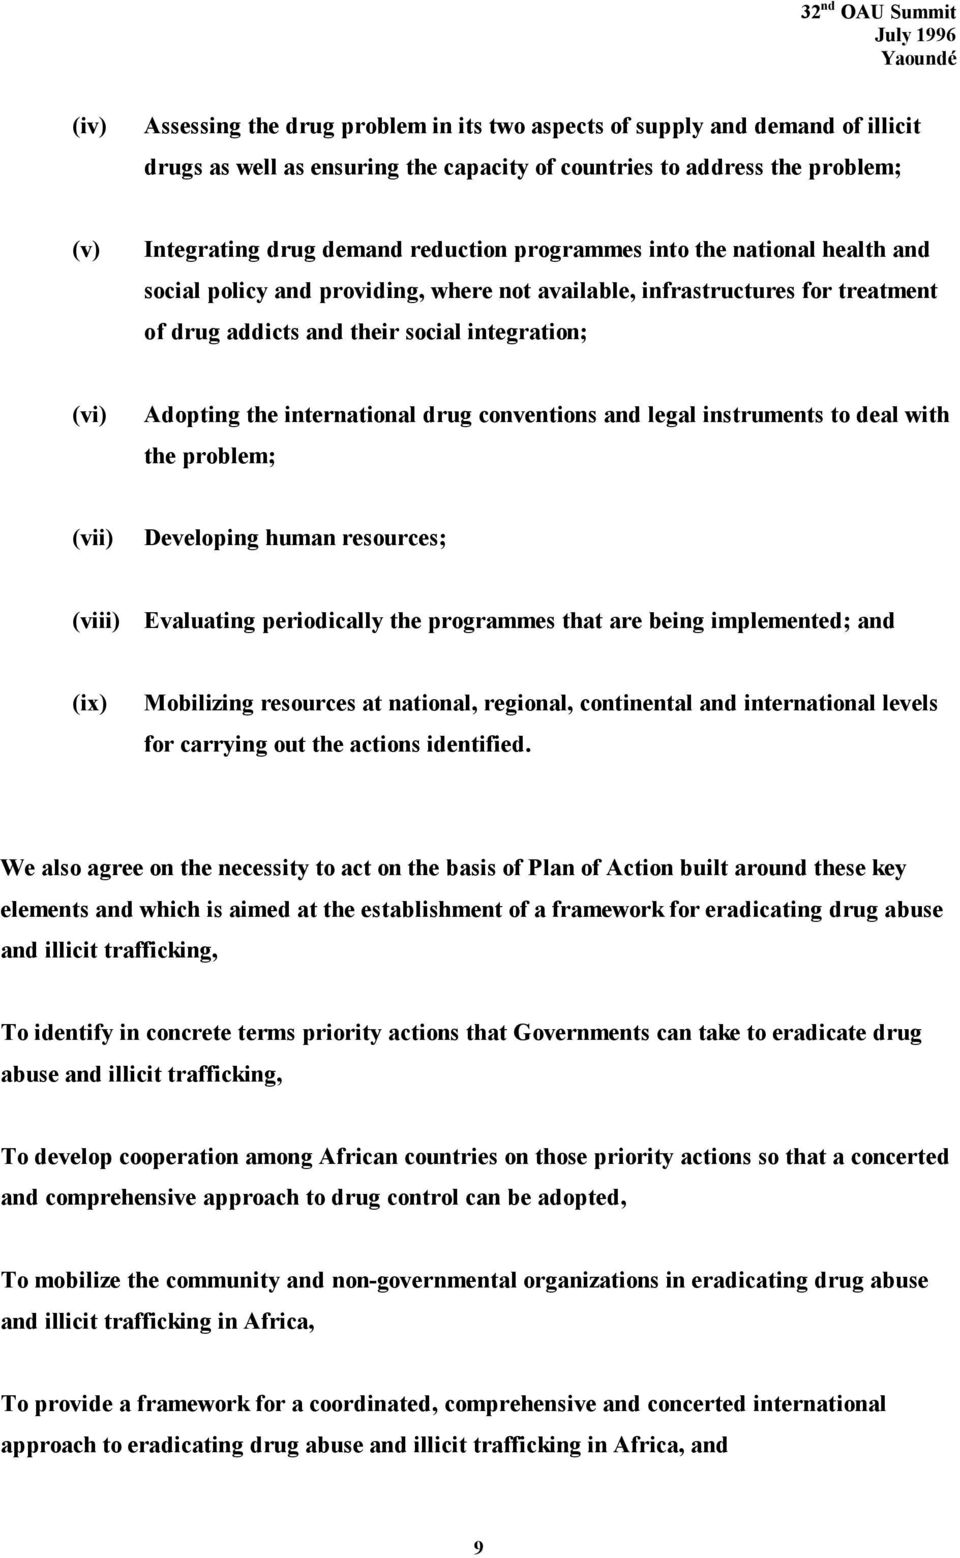 drug conventions and legal instruments to deal with the problem; (vii) Developing human resources; (viii) Evaluating periodically the programmes that are being implemented; and (ix) Mobilizing